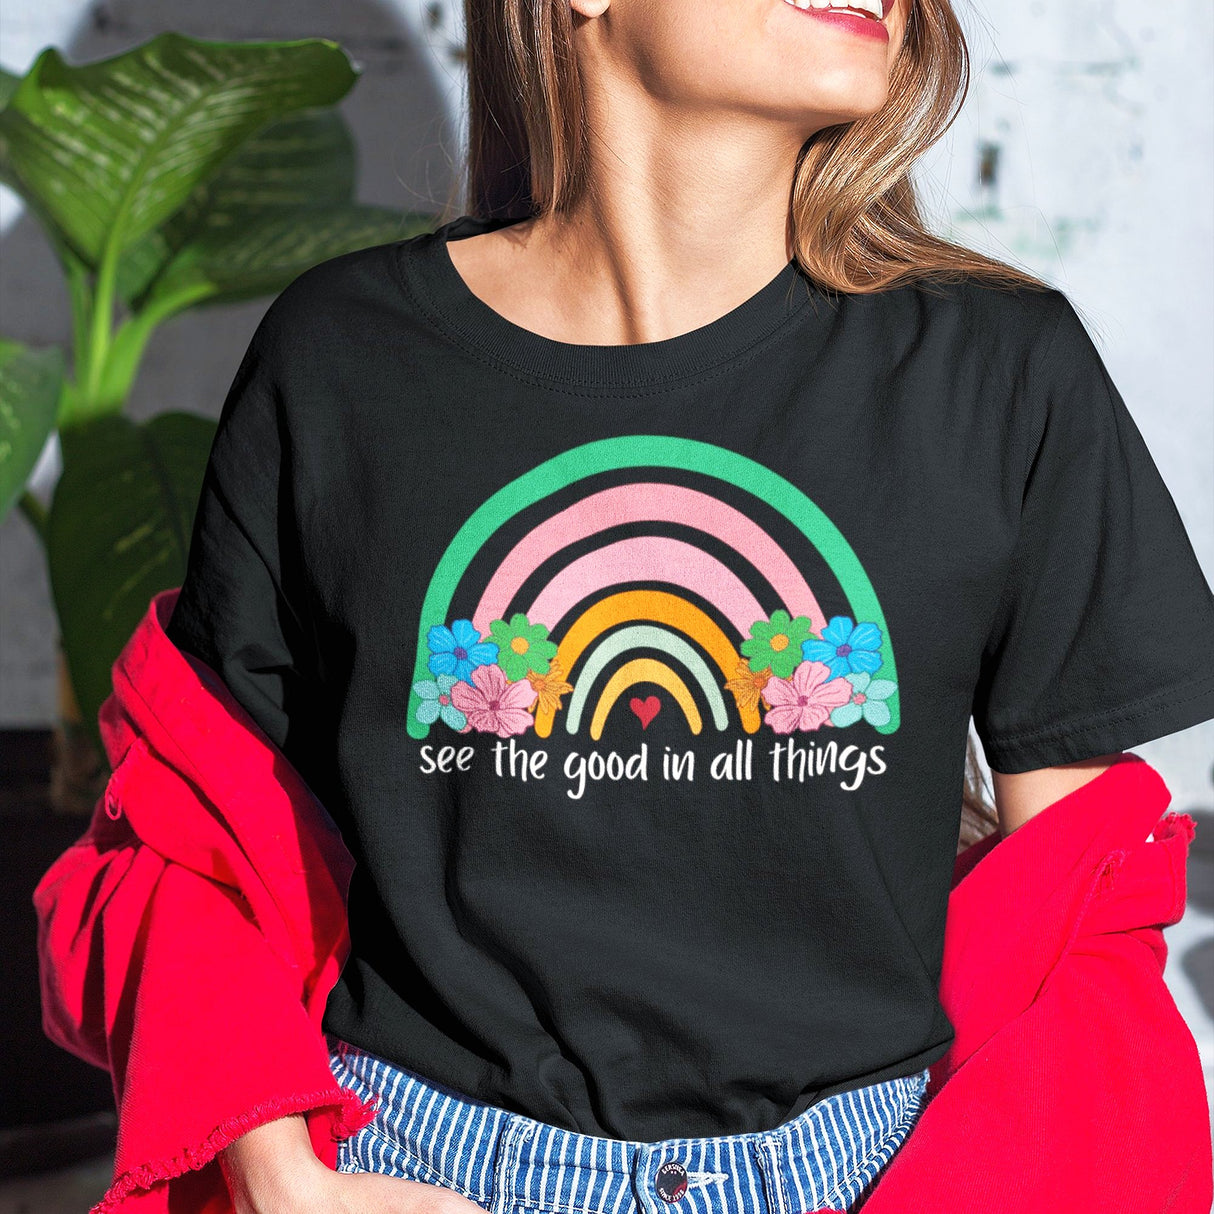 see-the-good-in-all-things-life-tee-motivational-t-shirt-positive-tee-optimism-t-shirt-gratitude-tee#color_black